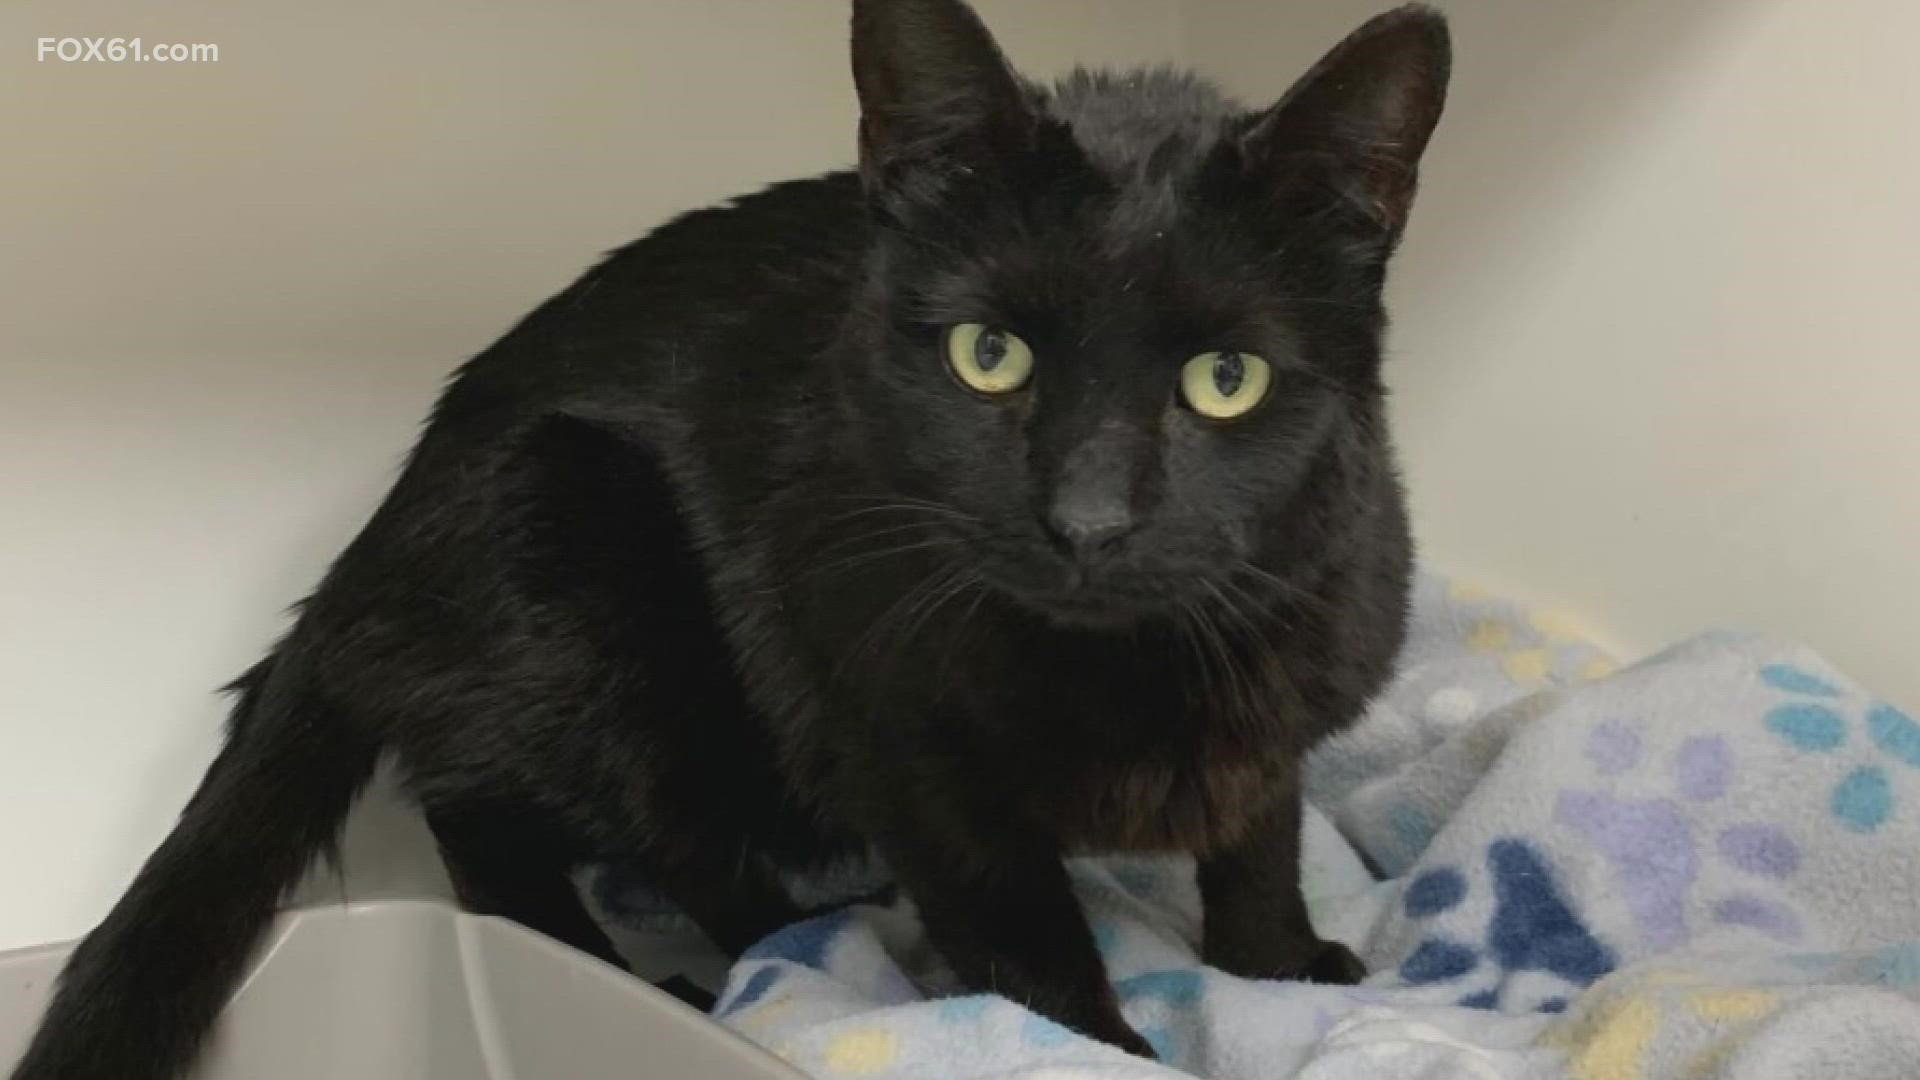 Minka was spotted multiple times by drivers on I-91 northbound and southbound. It was last week when Madore spotted Minka twice and decided to get her.